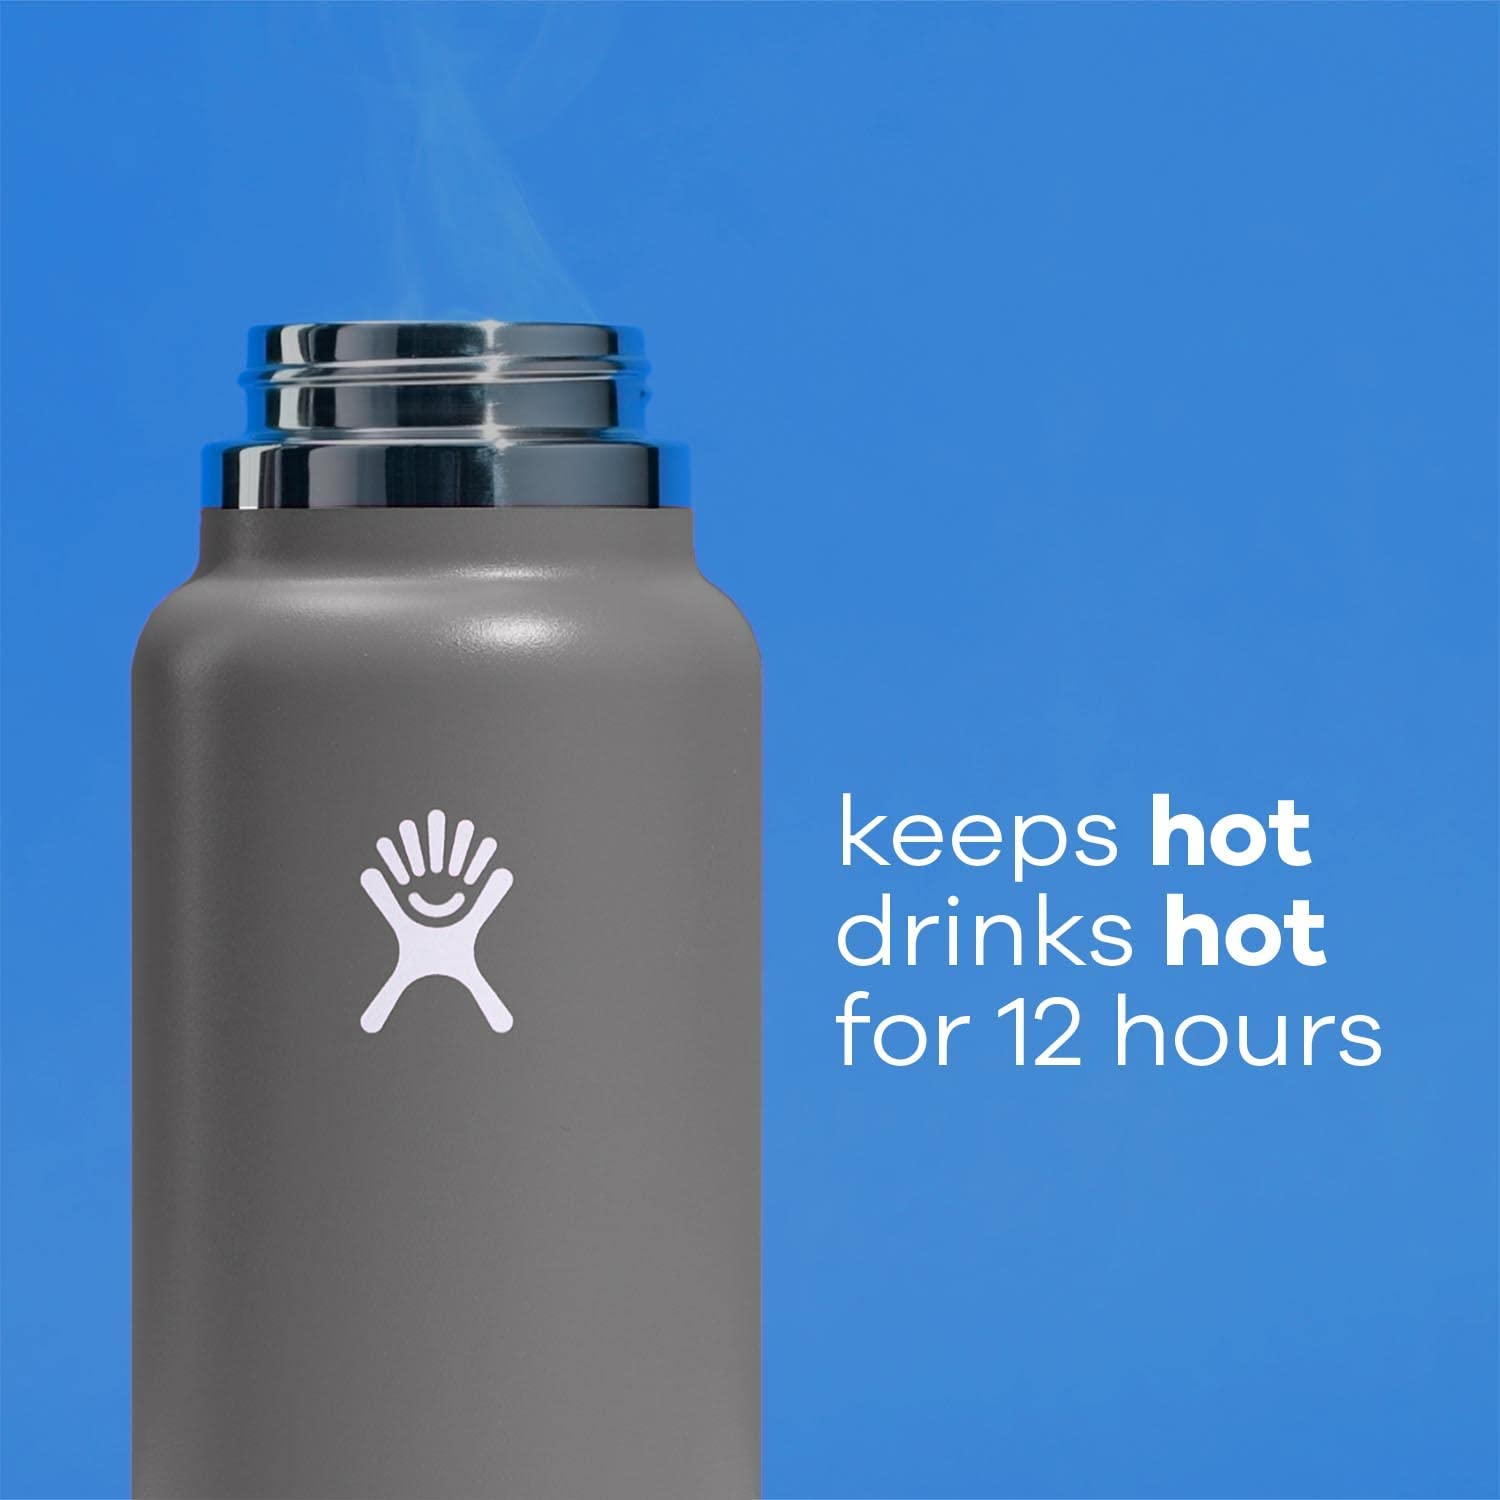 Hydro Flask 20 oz Wide Mouth Bottle Seagrass